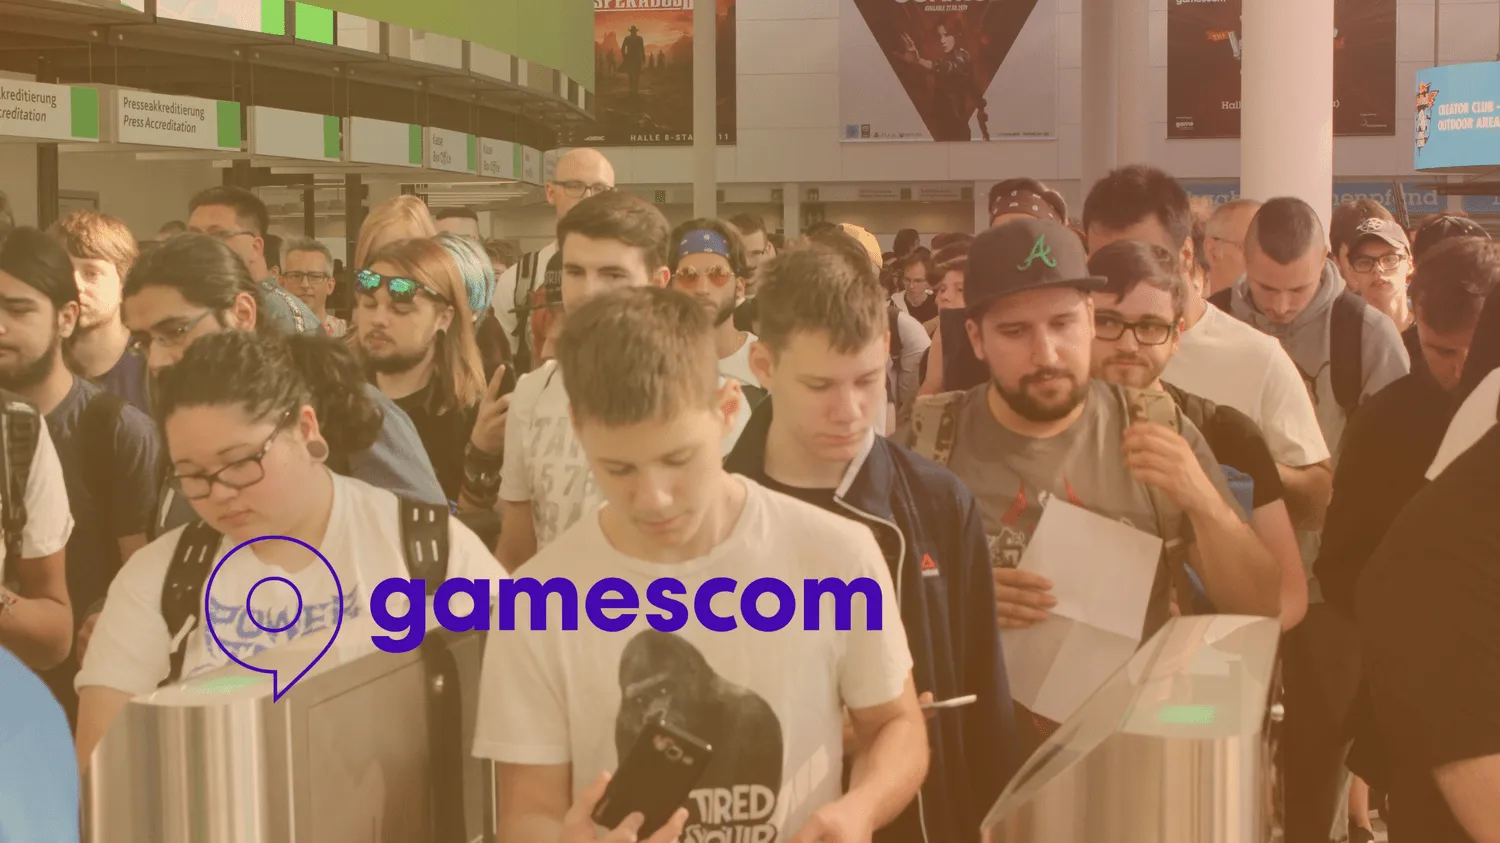 a large number of people in Cologne on Gamescom